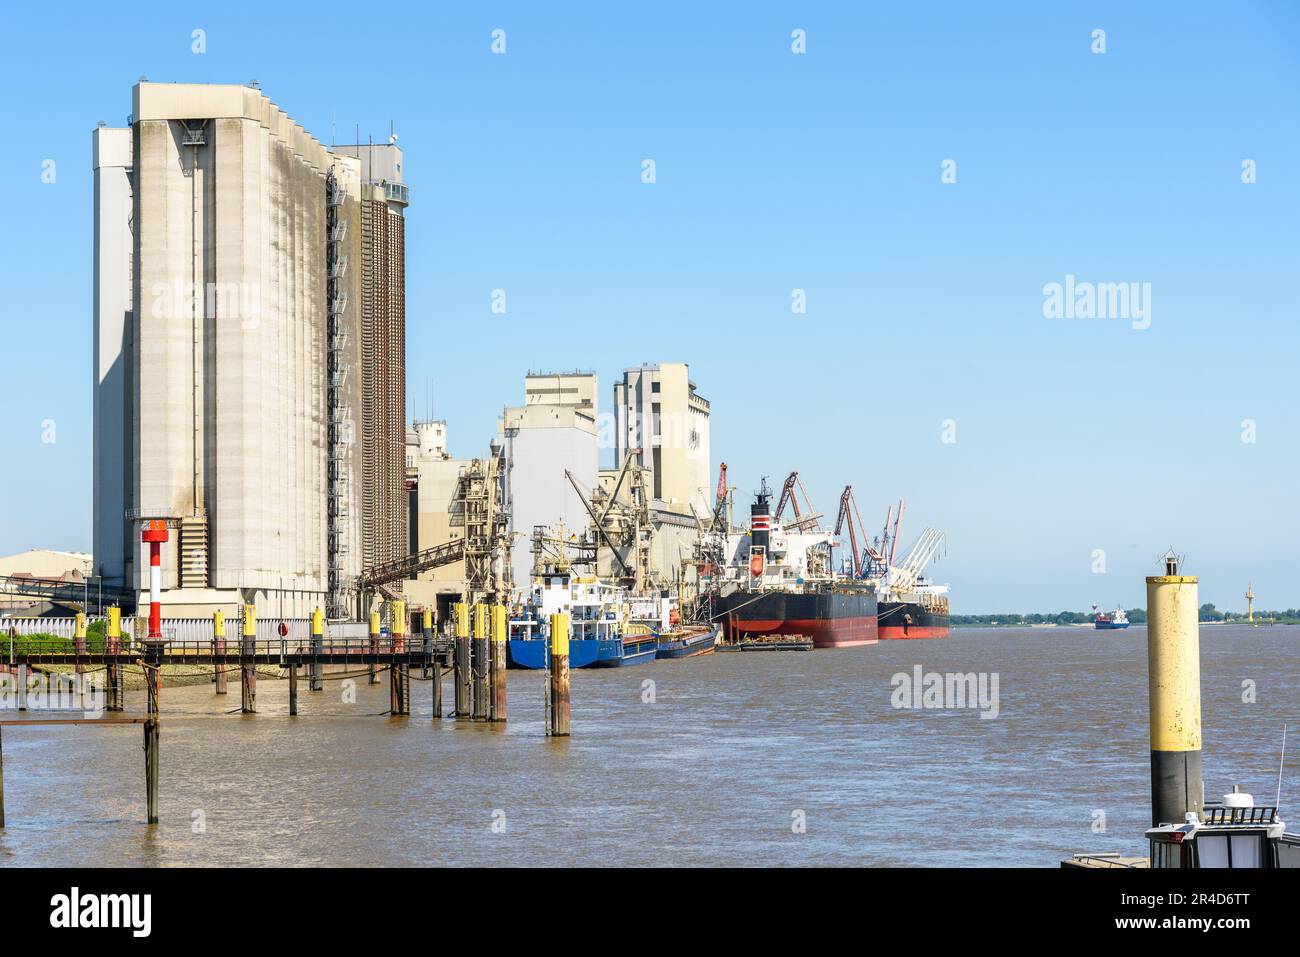 Bulk carrier ships moored to a commercial dock on a river harbour on a clear summer day Stock Photo